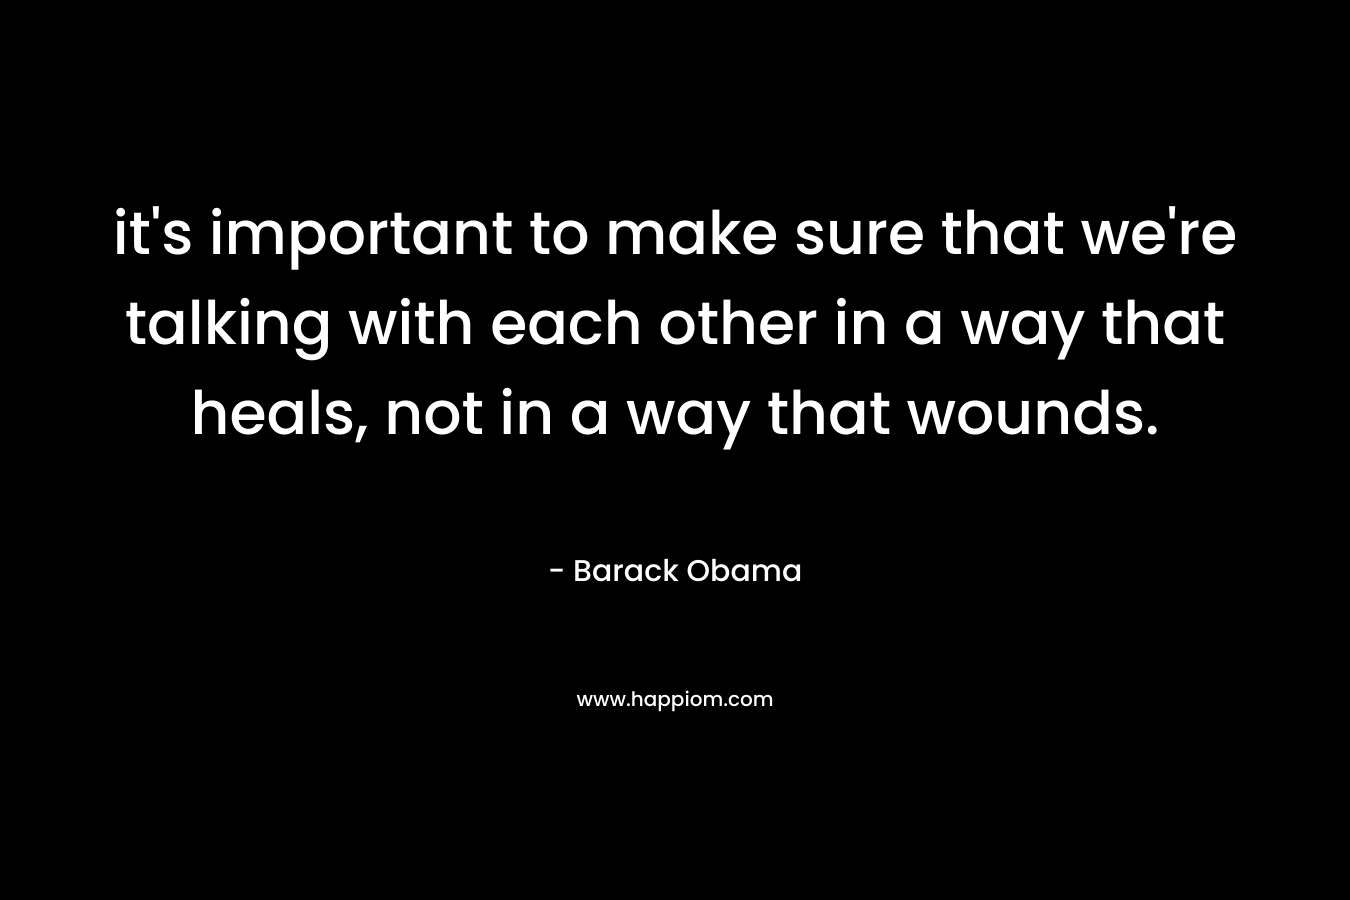 it's important to make sure that we're talking with each other in a way that heals, not in a way that wounds.